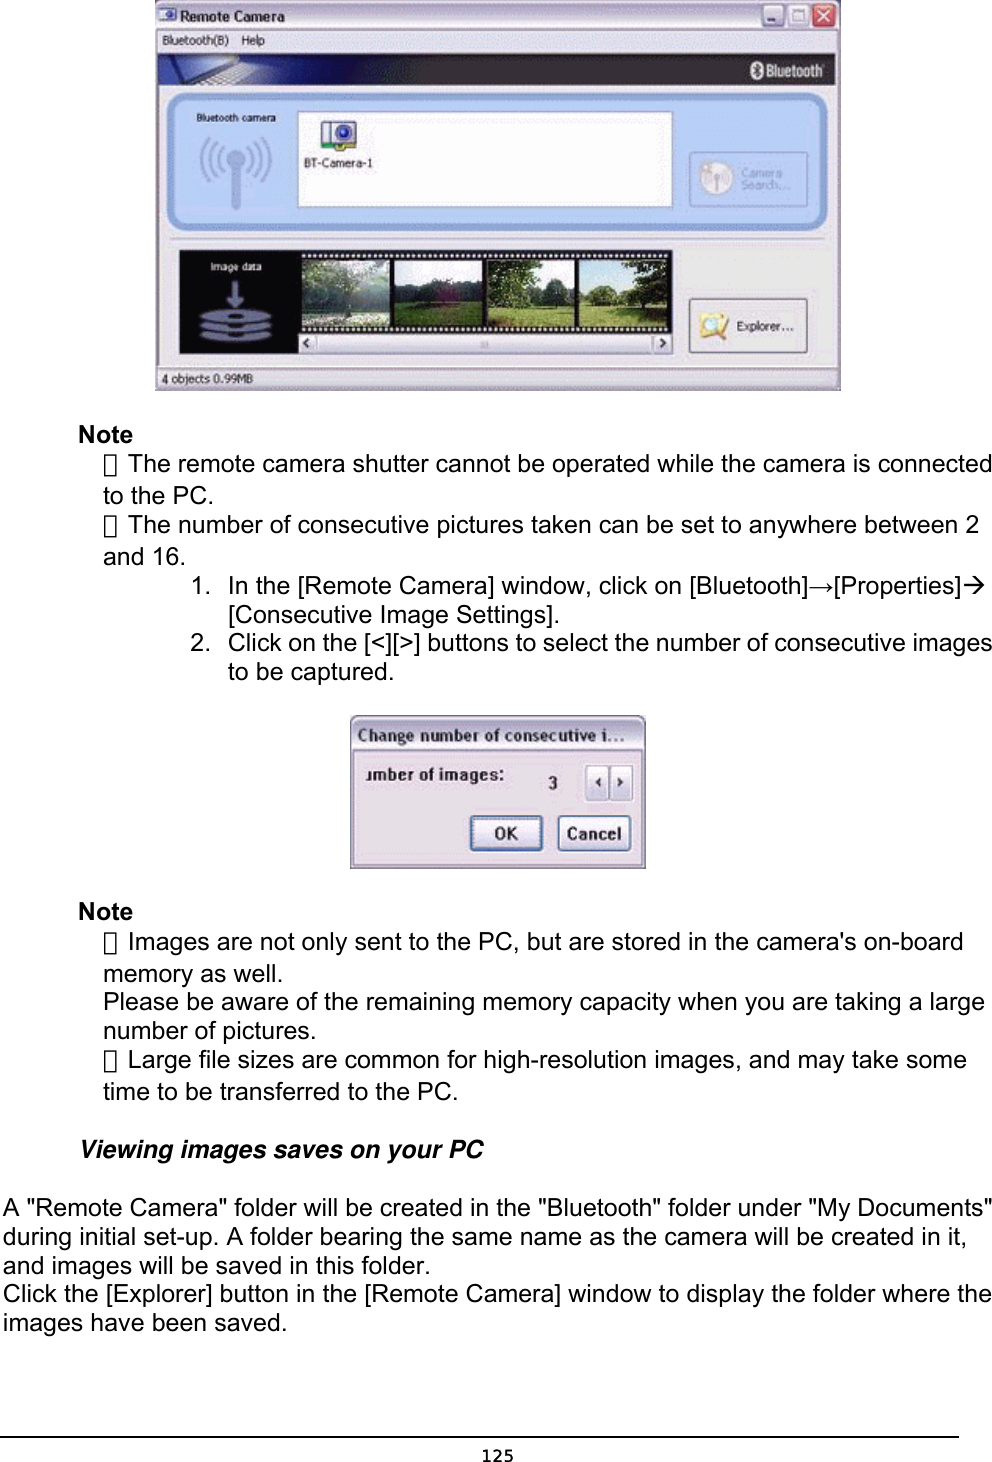   Note  ．The remote camera shutter cannot be operated while the camera is connected   to the PC.    ．The number of consecutive pictures taken can be set to anywhere between 2  and 16. 1.  In the [Remote Camera] window, click on [Bluetooth]→[Properties]Æ    [Consecutive Image Settings].  2.  Click on the [&lt;][&gt;] buttons to select the number of consecutive images to be captured.  Note  ．Images are not only sent to the PC, but are stored in the camera&apos;s on-board   memory as well.   Please be aware of the remaining memory capacity when you are taking a large  number of pictures.  ．Large file sizes are common for high-resolution images, and may take some   time to be transferred to the PC. Viewing images saves on your PC A &quot;Remote Camera&quot; folder will be created in the &quot;Bluetooth&quot; folder under &quot;My Documents&quot; during initial set-up. A folder bearing the same name as the camera will be created in it, and images will be saved in this folder. Click the [Explorer] button in the [Remote Camera] window to display the folder where the images have been saved.  125